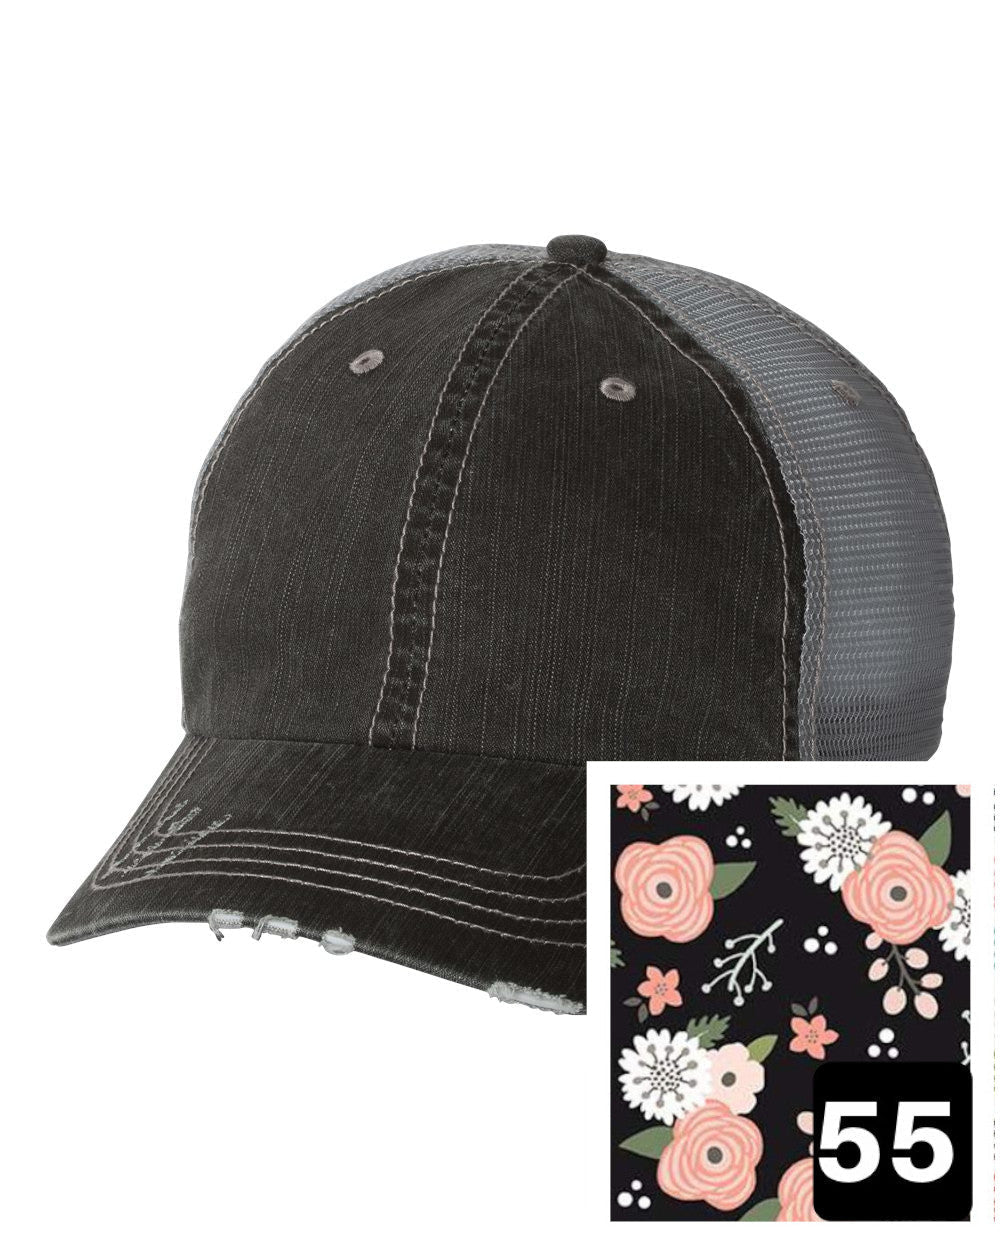 gray distressed trucker hat with petite floral on navy fabric state of Nevada